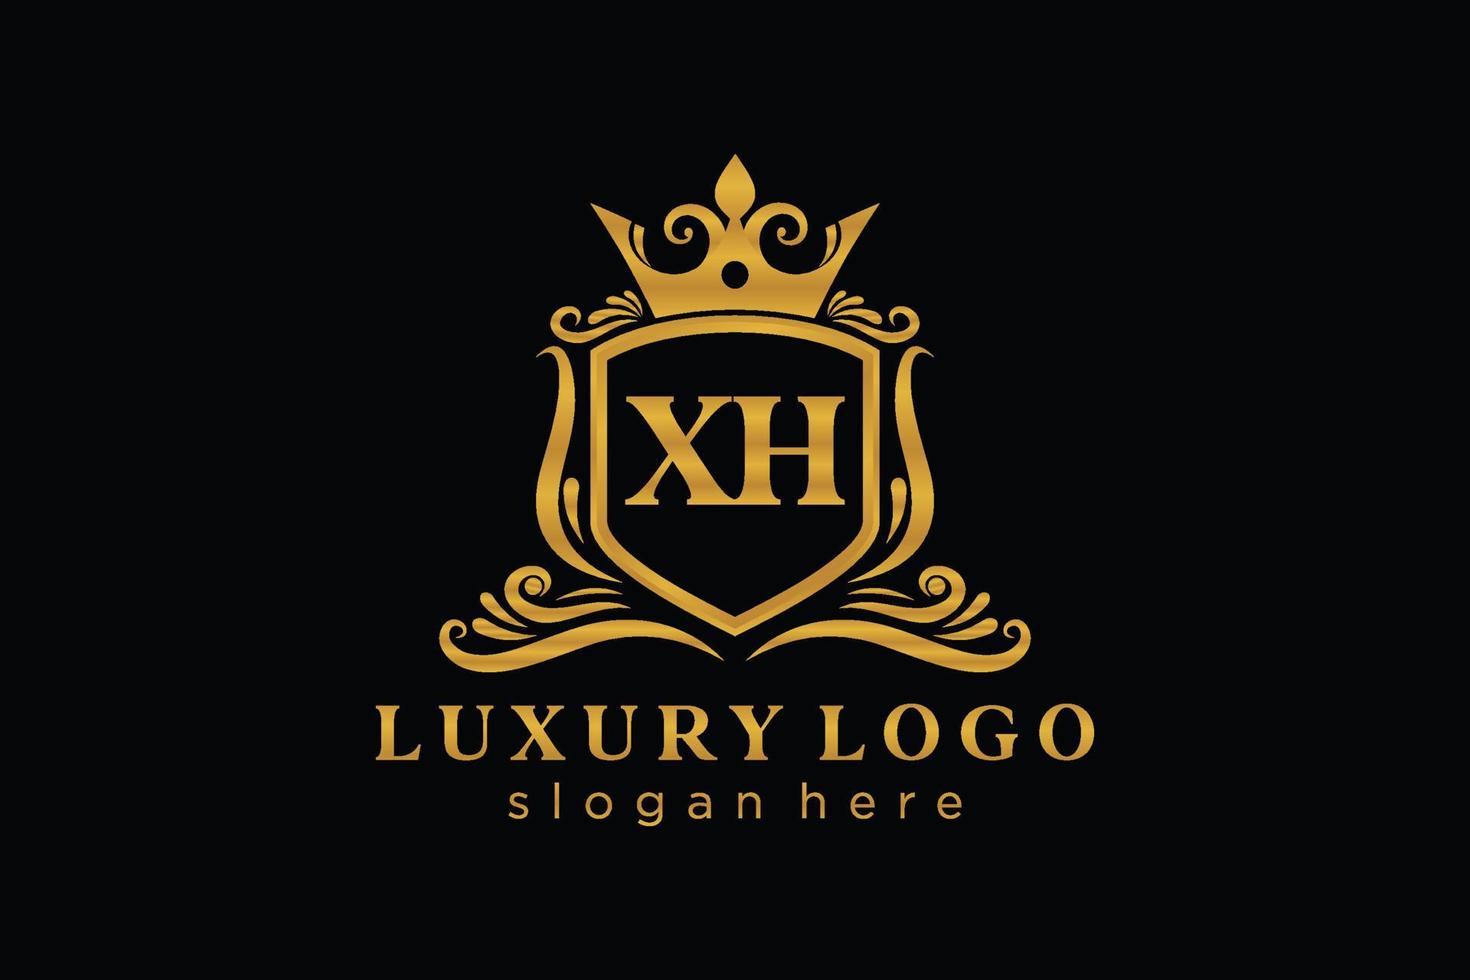 Initial XH Letter Royal Luxury Logo template in vector art for Restaurant, Royalty, Boutique, Cafe, Hotel, Heraldic, Jewelry, Fashion and other vector illustration.